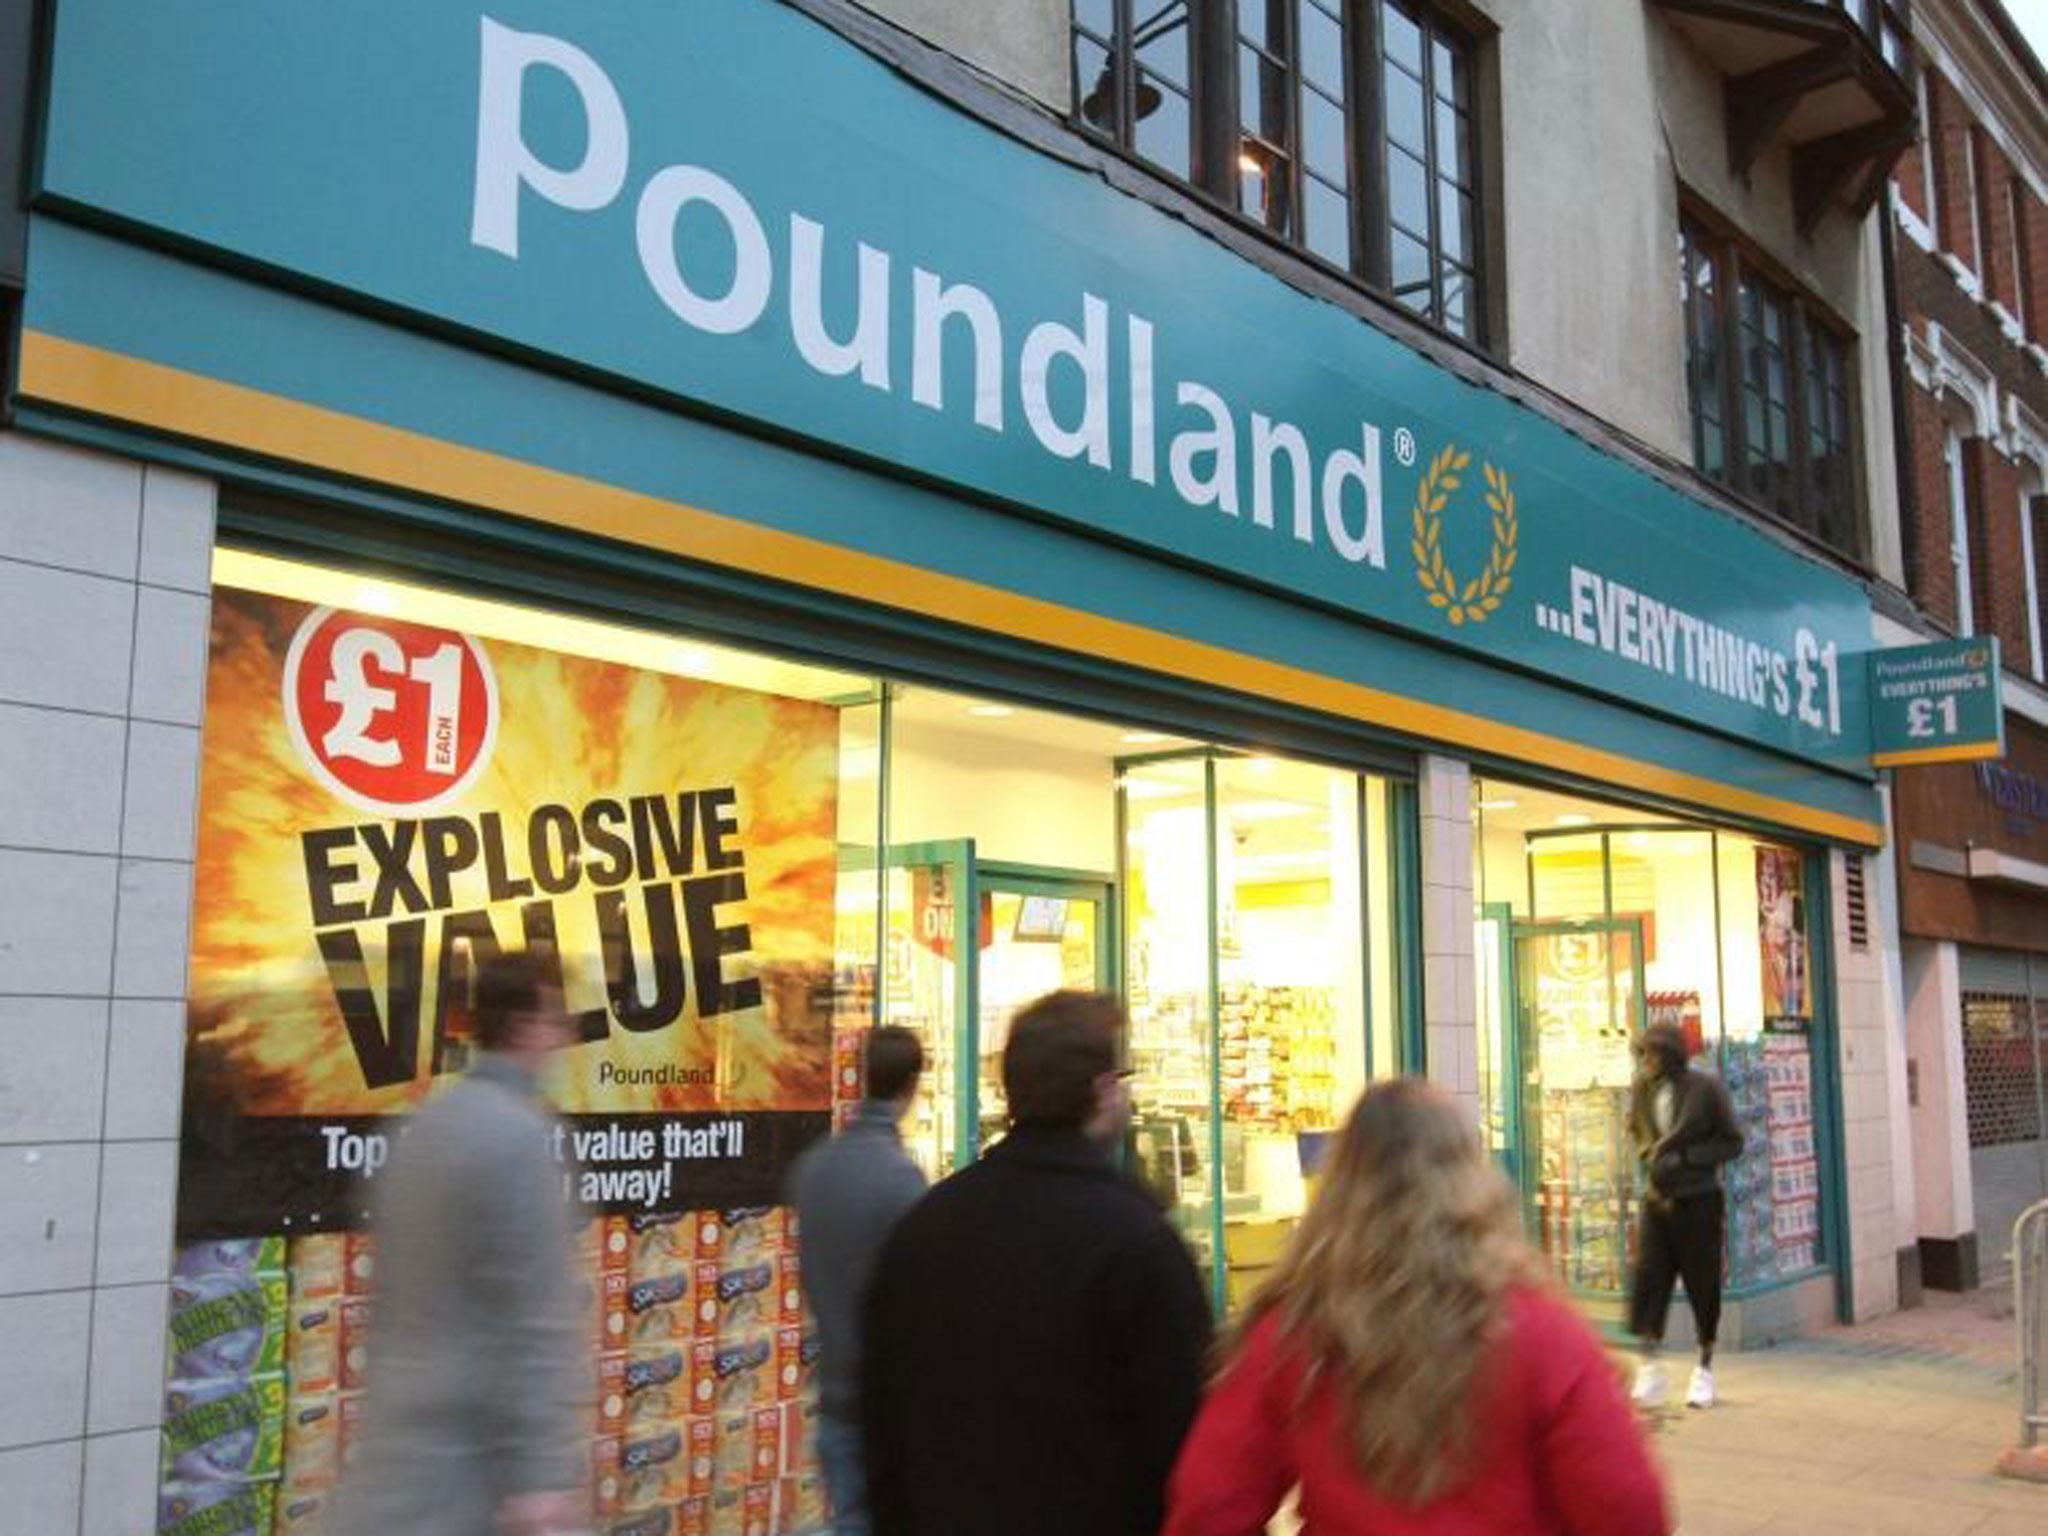 South African retailer Steinhoff, whose 2,300 stores sell a range of items from furniture to discount apparel, will need to revive growth at Poundland